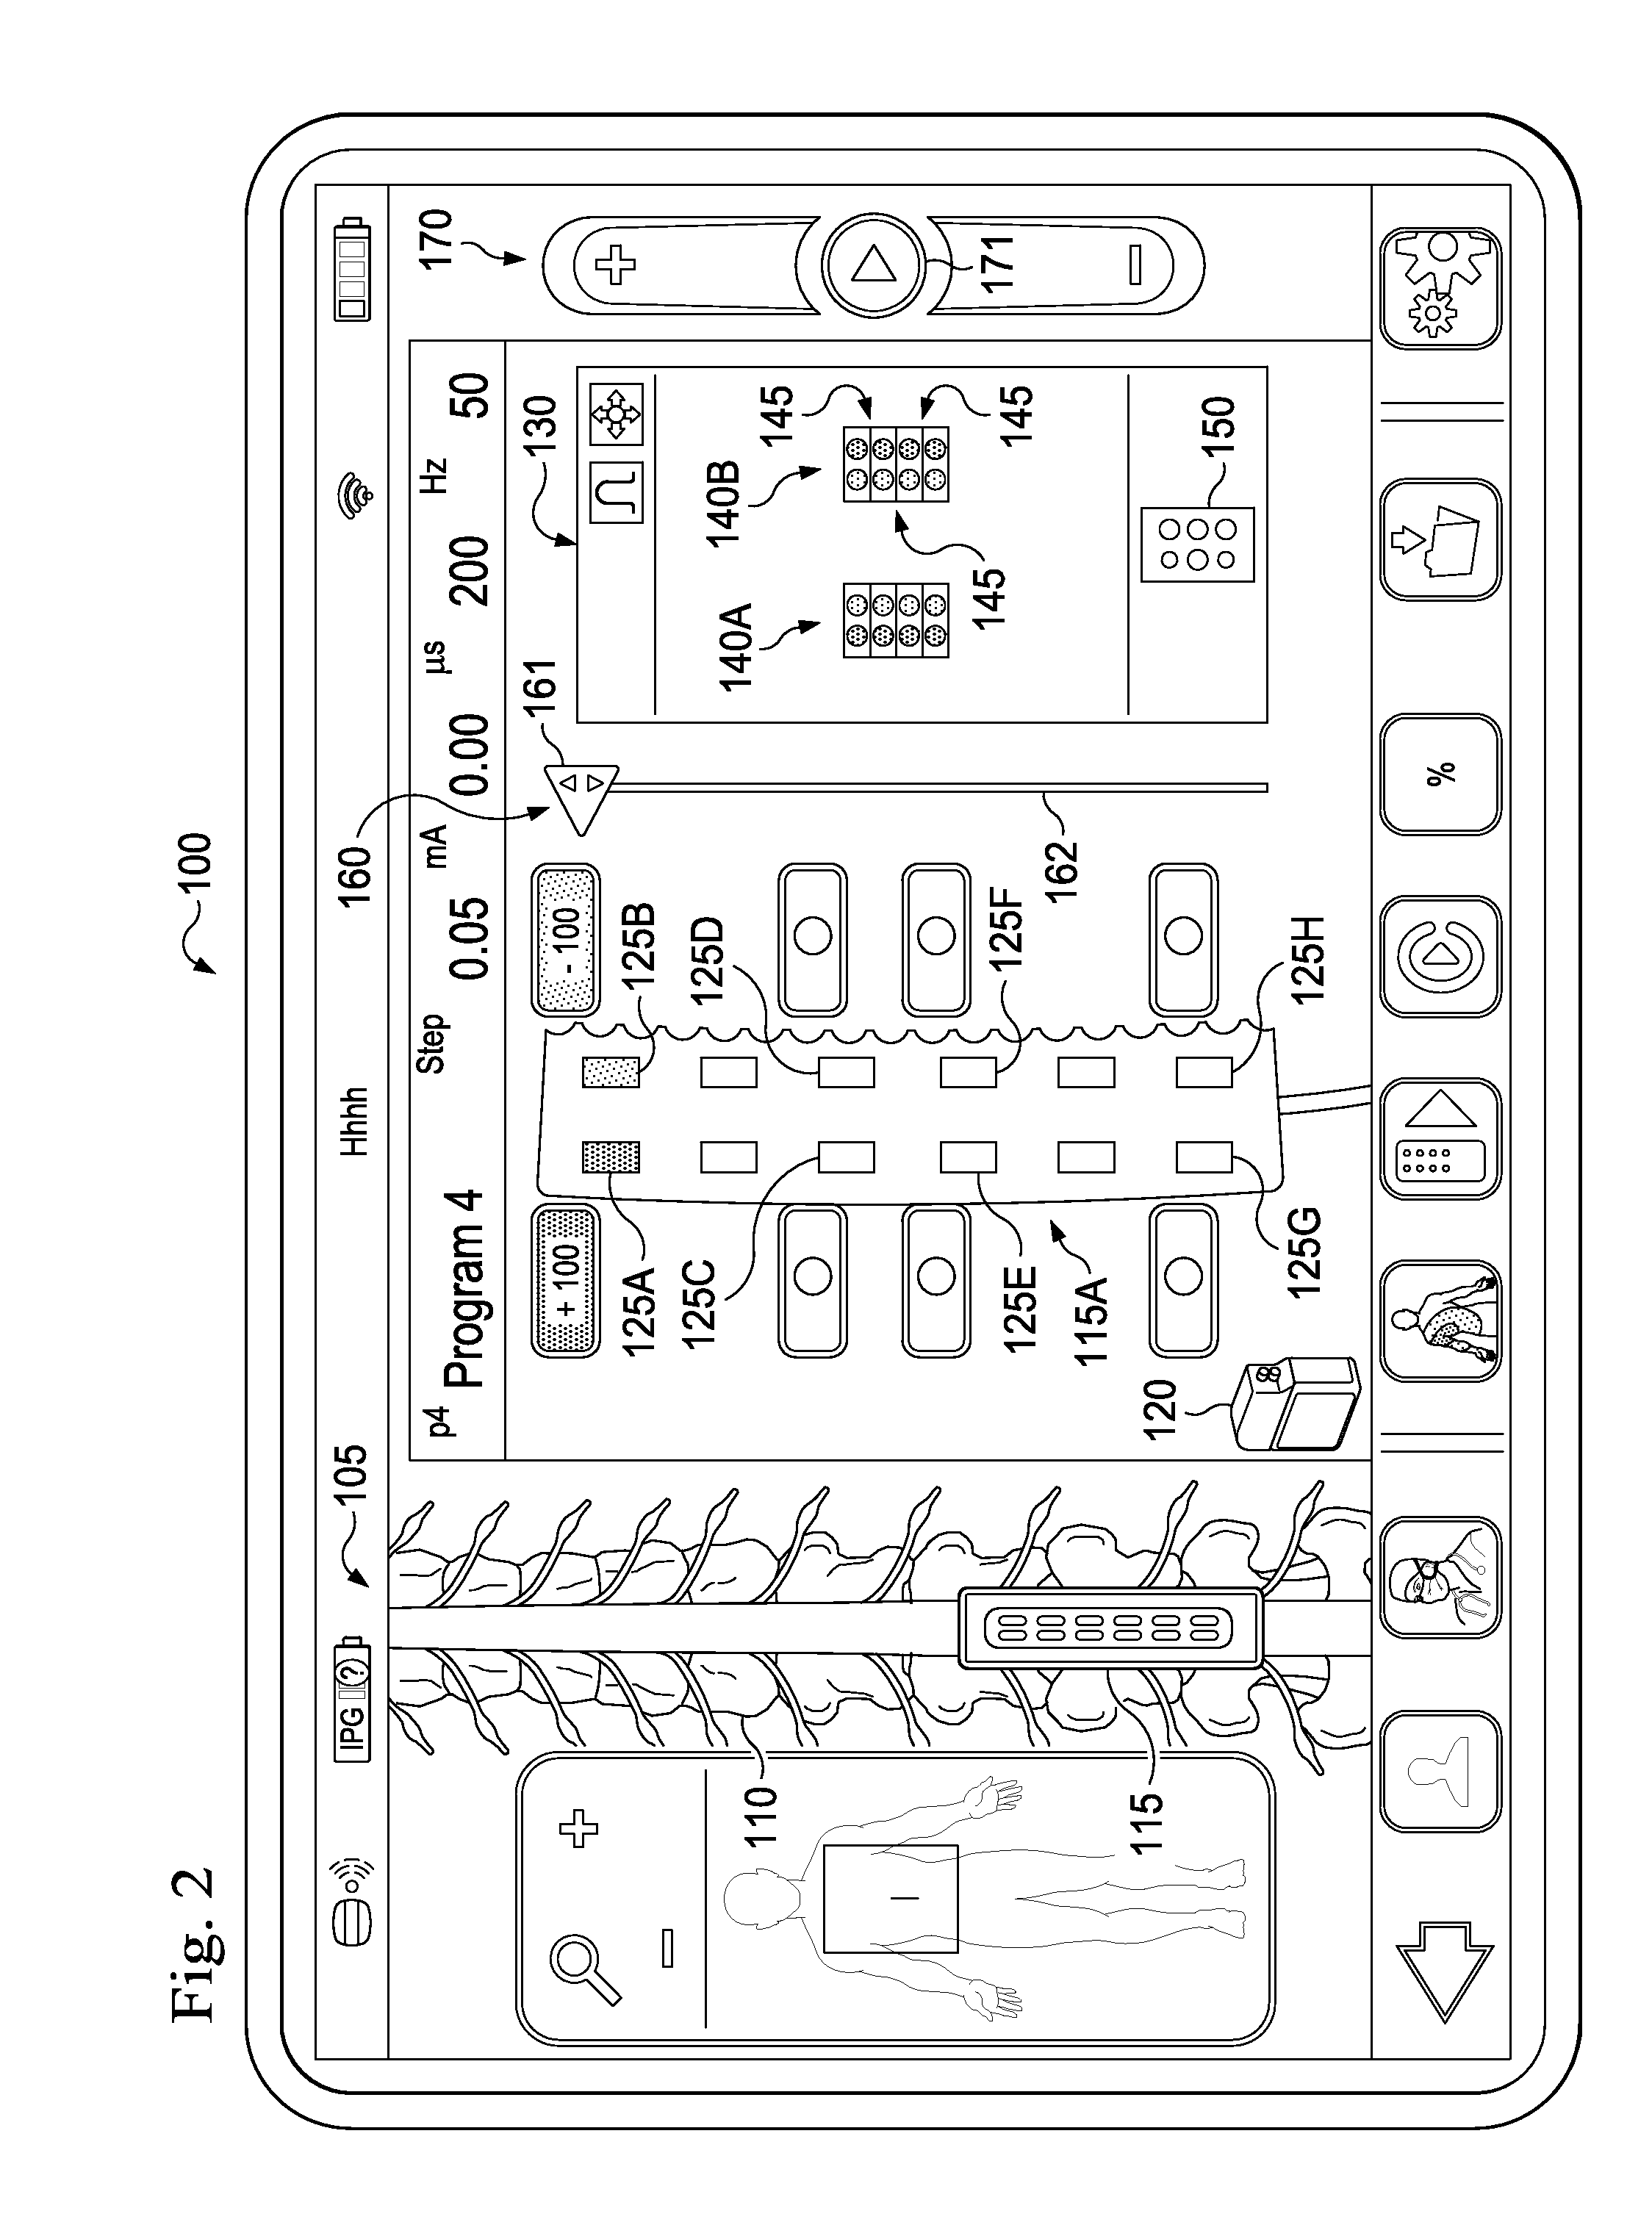 Method and System of Quick Neurostimulation Electrode Configuration and Positioning